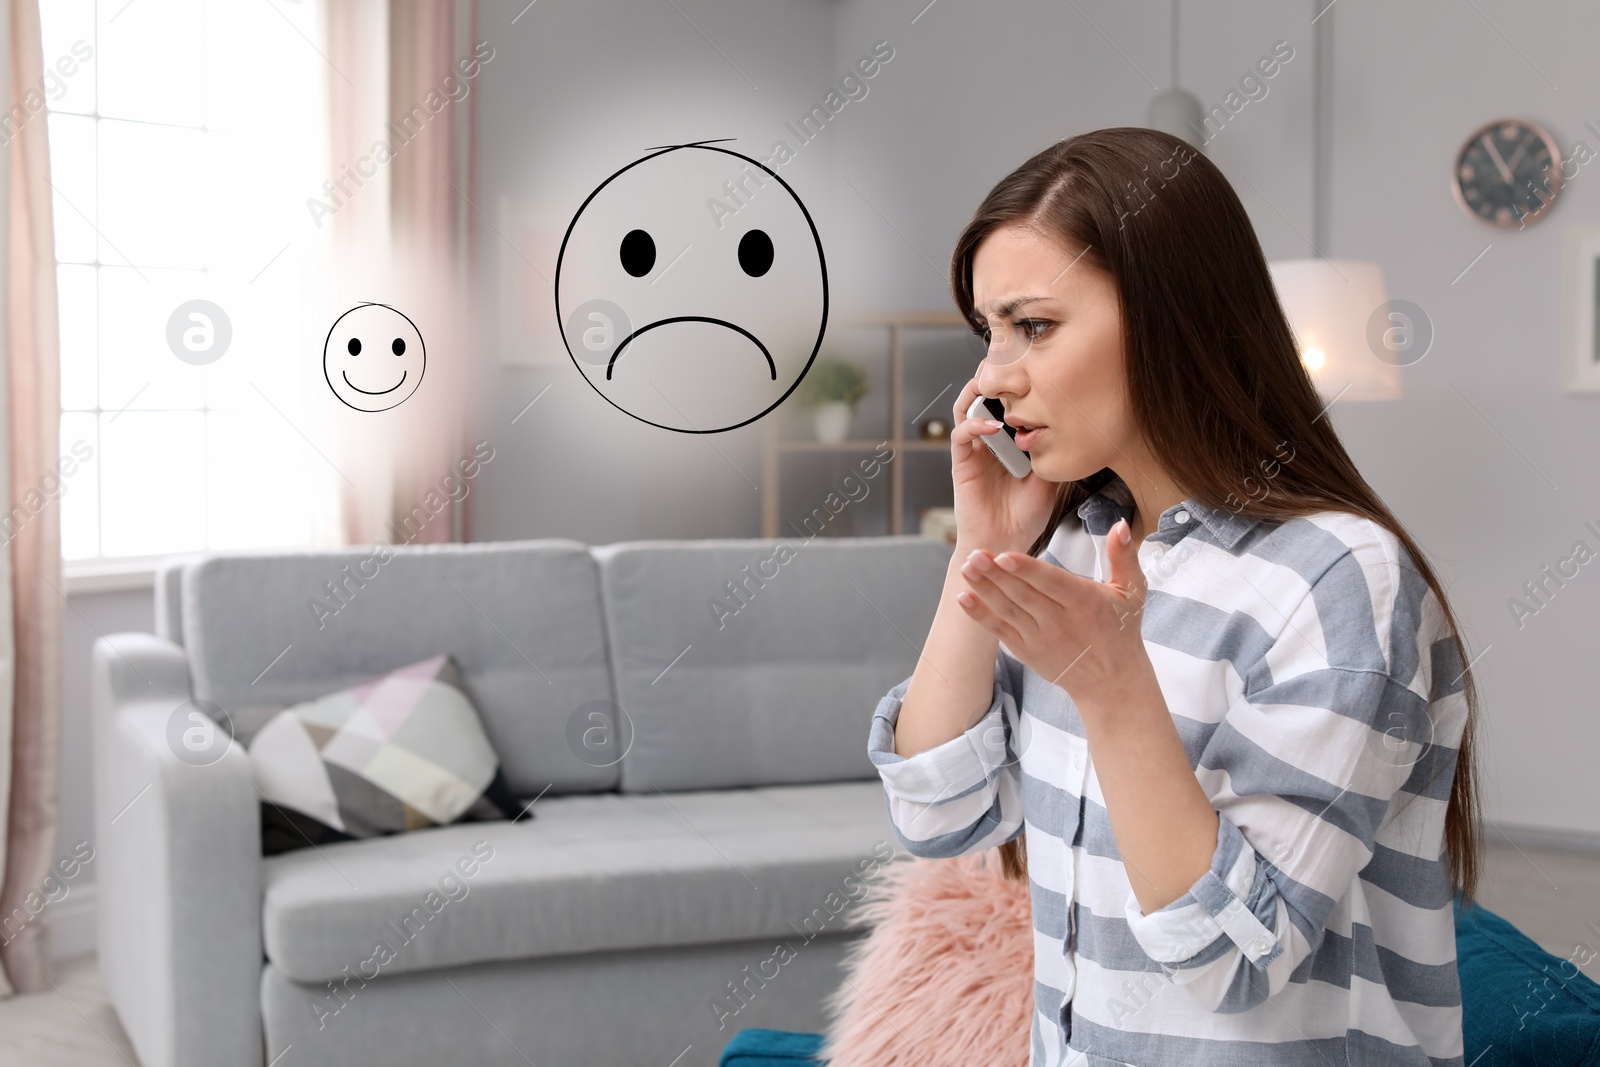 Image of Dissatisfied woman giving negative feedback by phone at home. Illustrations of sad, neutral and happy faces